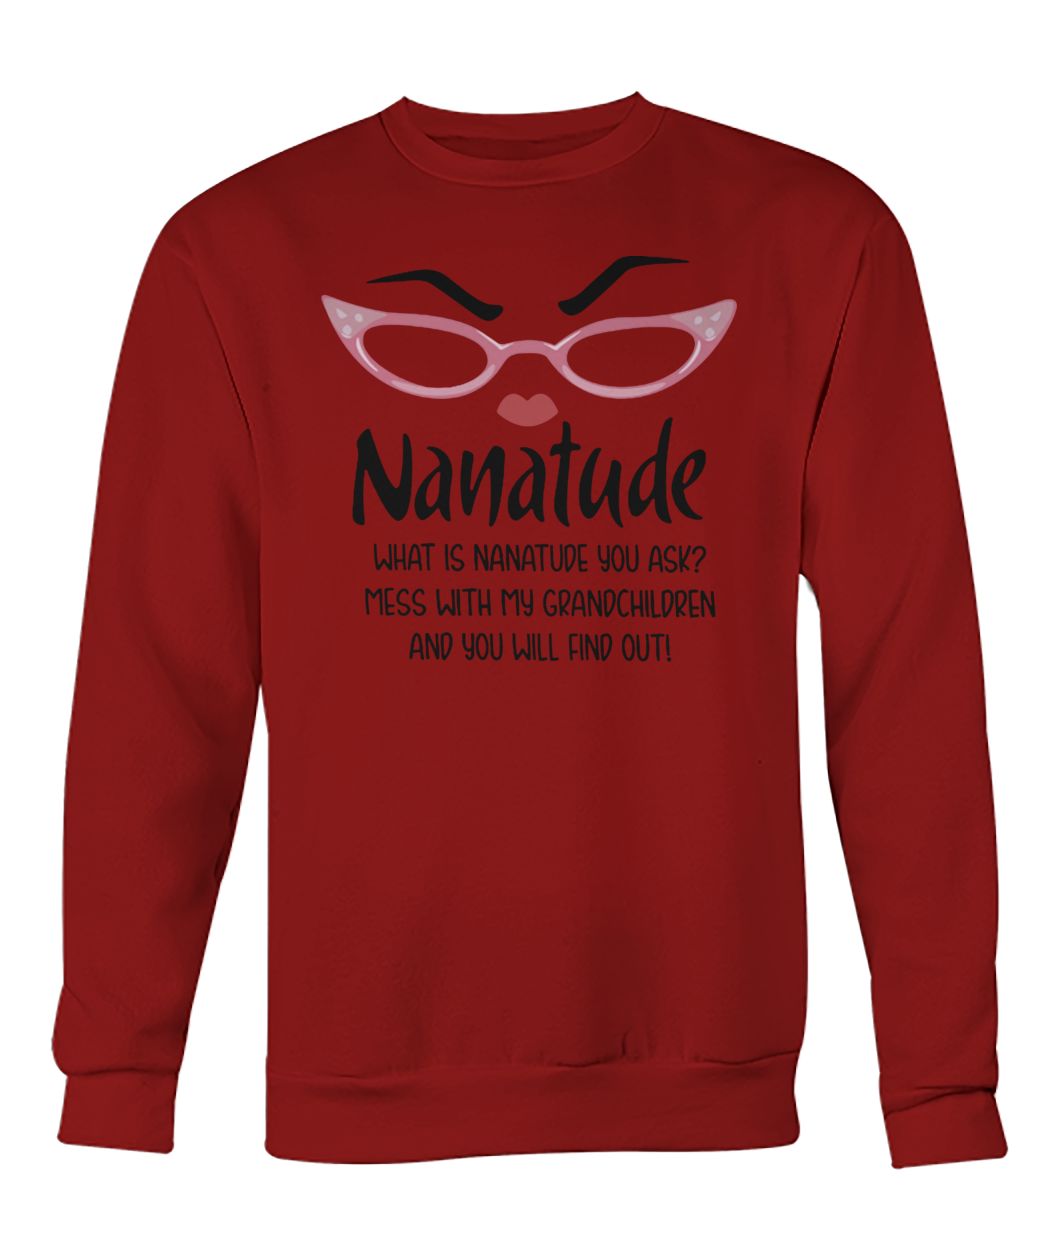 Nanatude what is nanatude you ask mess with my grandchildren and you will find out crew neck sweatshirt